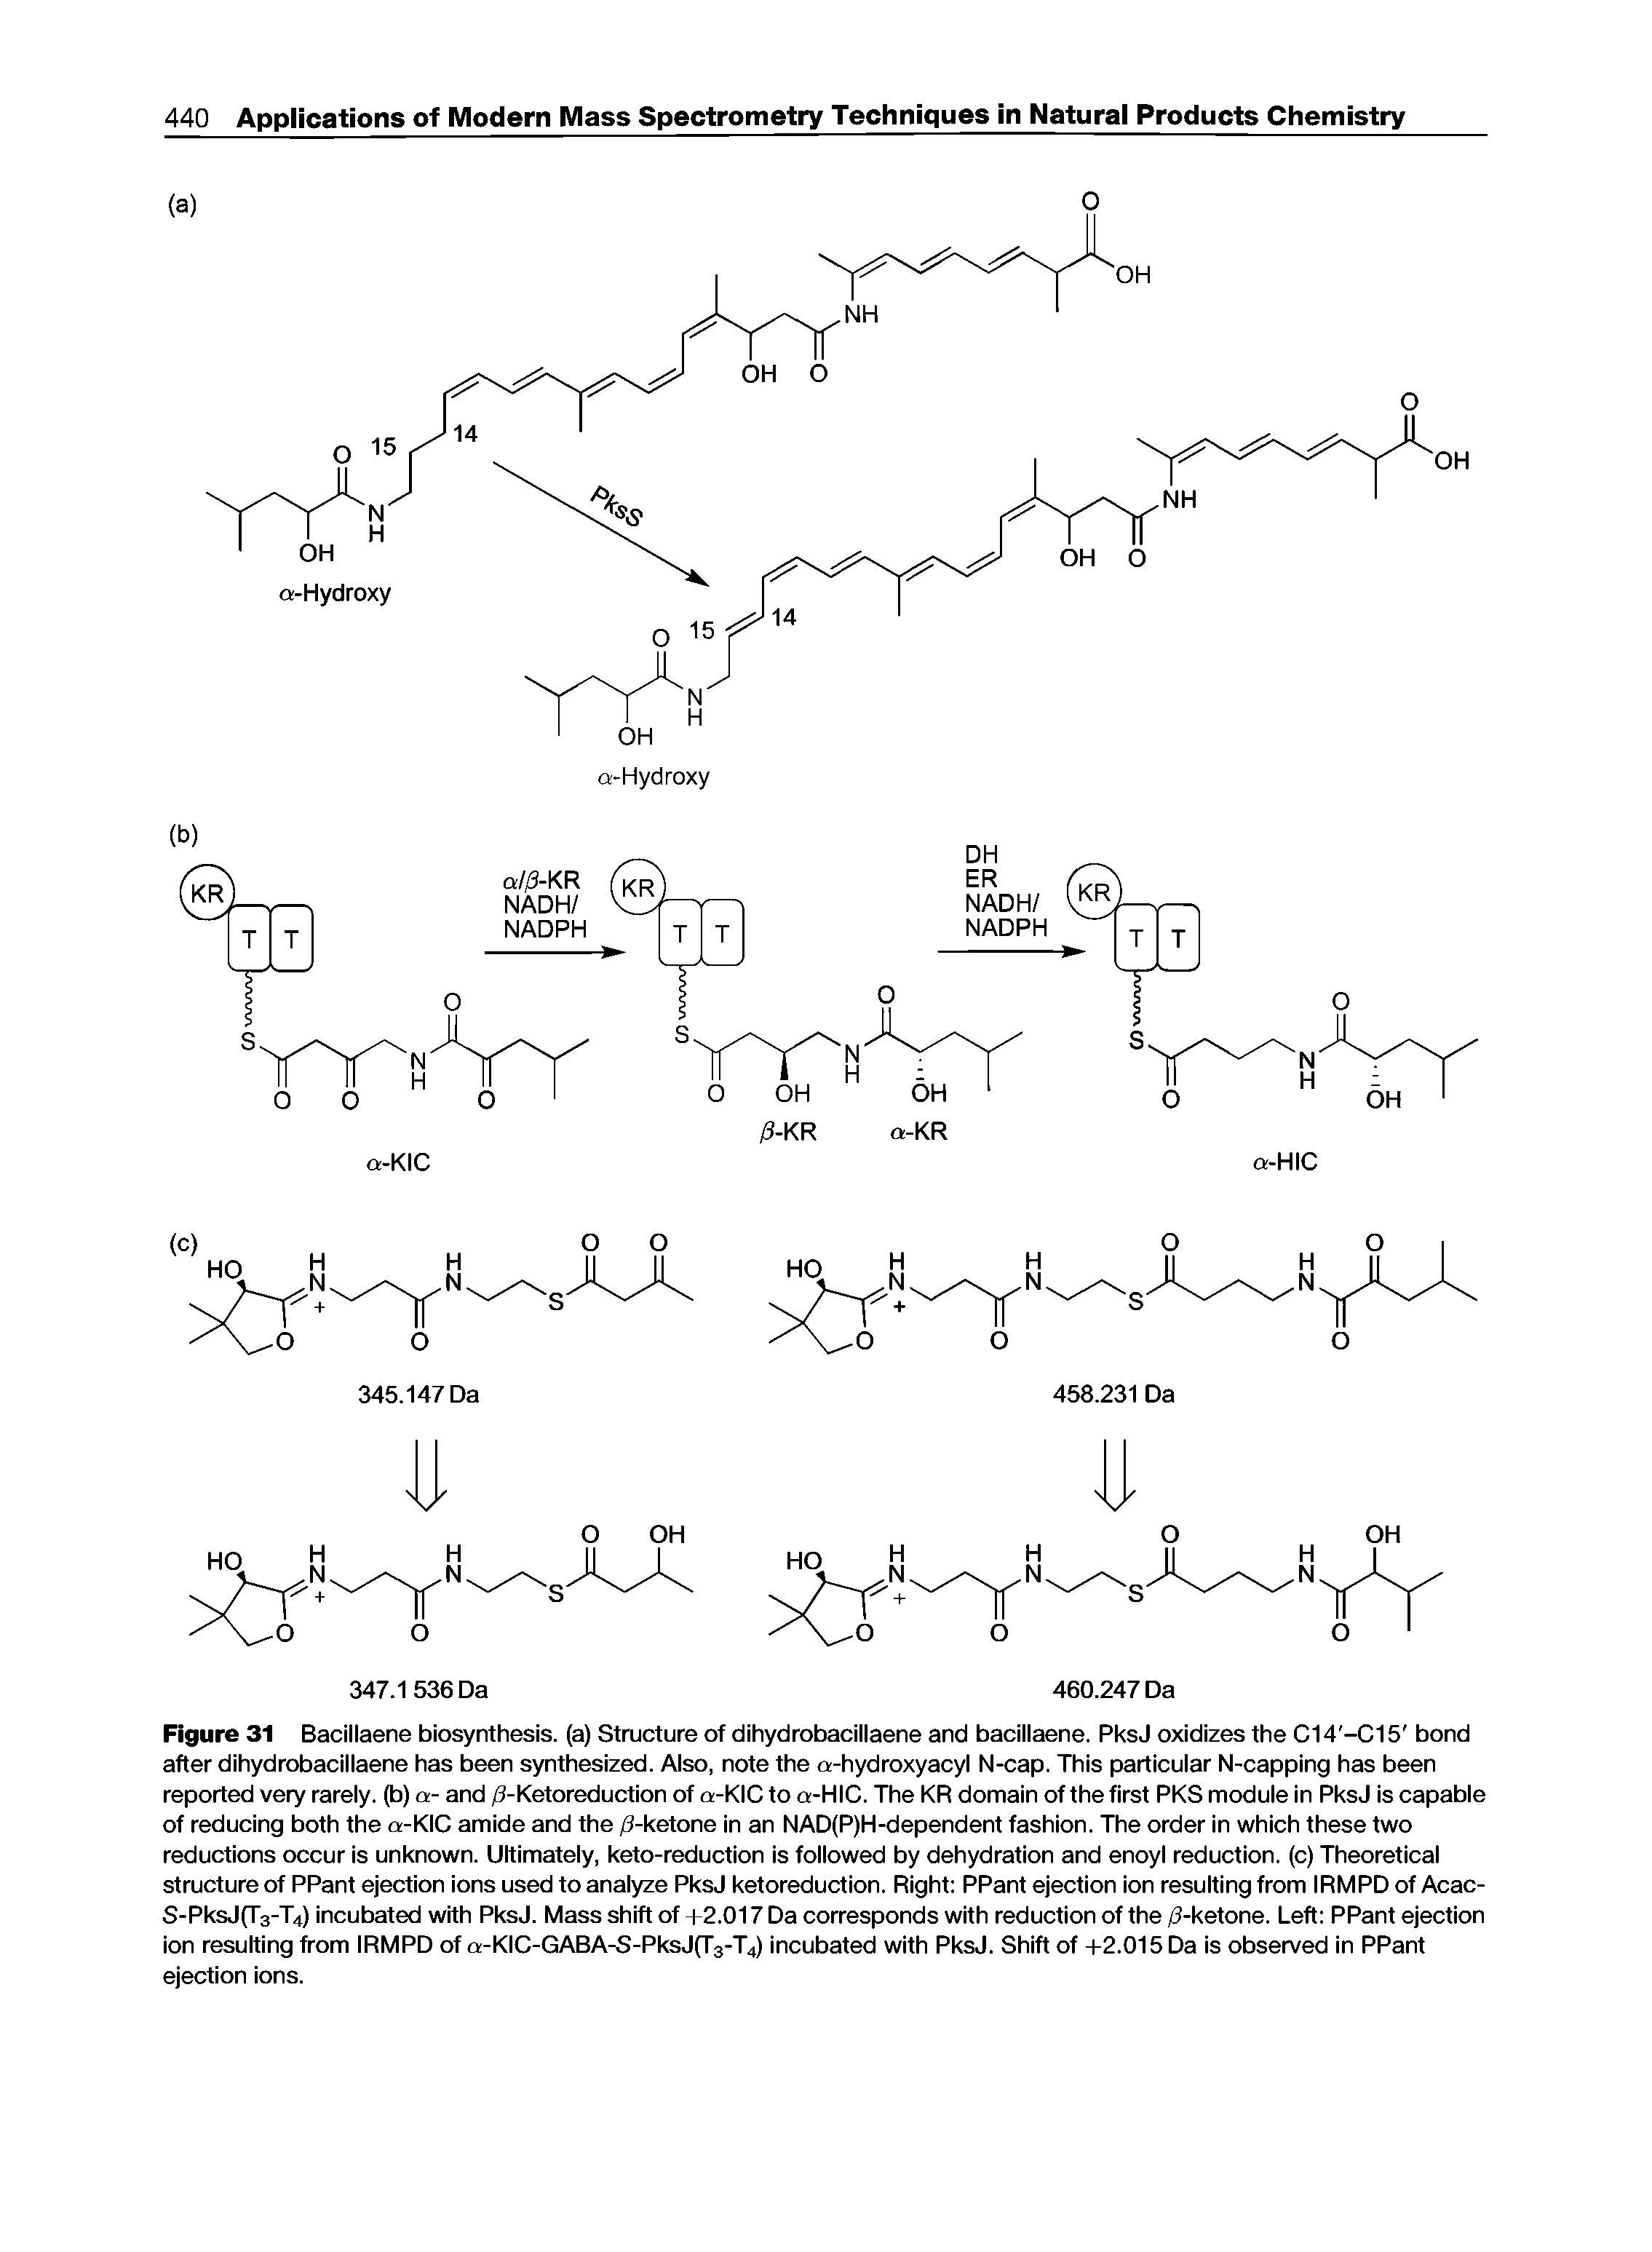 Figure 31 Bacillaene biosynthesis, (a) Structure of dihydrobacillaene and bacillaene. PksJ oxidizes the C14 -C15 bond after dihydrobacillaene has been synthesized. Also, note the a-hydroxyacyl N-cap. This particular N-capping has been reported very rarely. (b)a- and /3-Ketoreduction of a-KICto a-HIC. The KR domain of the first PKS module in PksJ is capable of reducing both the a-KIC amide and the /3-ketone in an NAD(P)H-dependent fashion. The order in which these two reductions occur is unknown. Ultimately, keto-reduction is followed by dehydration and enoyl reduction, (c) Theoretical structure of PPant ejection ions used to analyze PksJ ketoreduction. Right PPant ejection ion resulting from IRMPD of Acac-S-PksJ(T3-T4) incubated with PksJ. Mass shift of +2.017 Da corresponds with reduction of the /3-ketone. Left PPant ejection ion resulting from IRMPD of a-KIC-GABA-S-PksJ(T3-T4) incubated with PksJ. Shift of +2.015 Da is observed in PPant ejection ions.